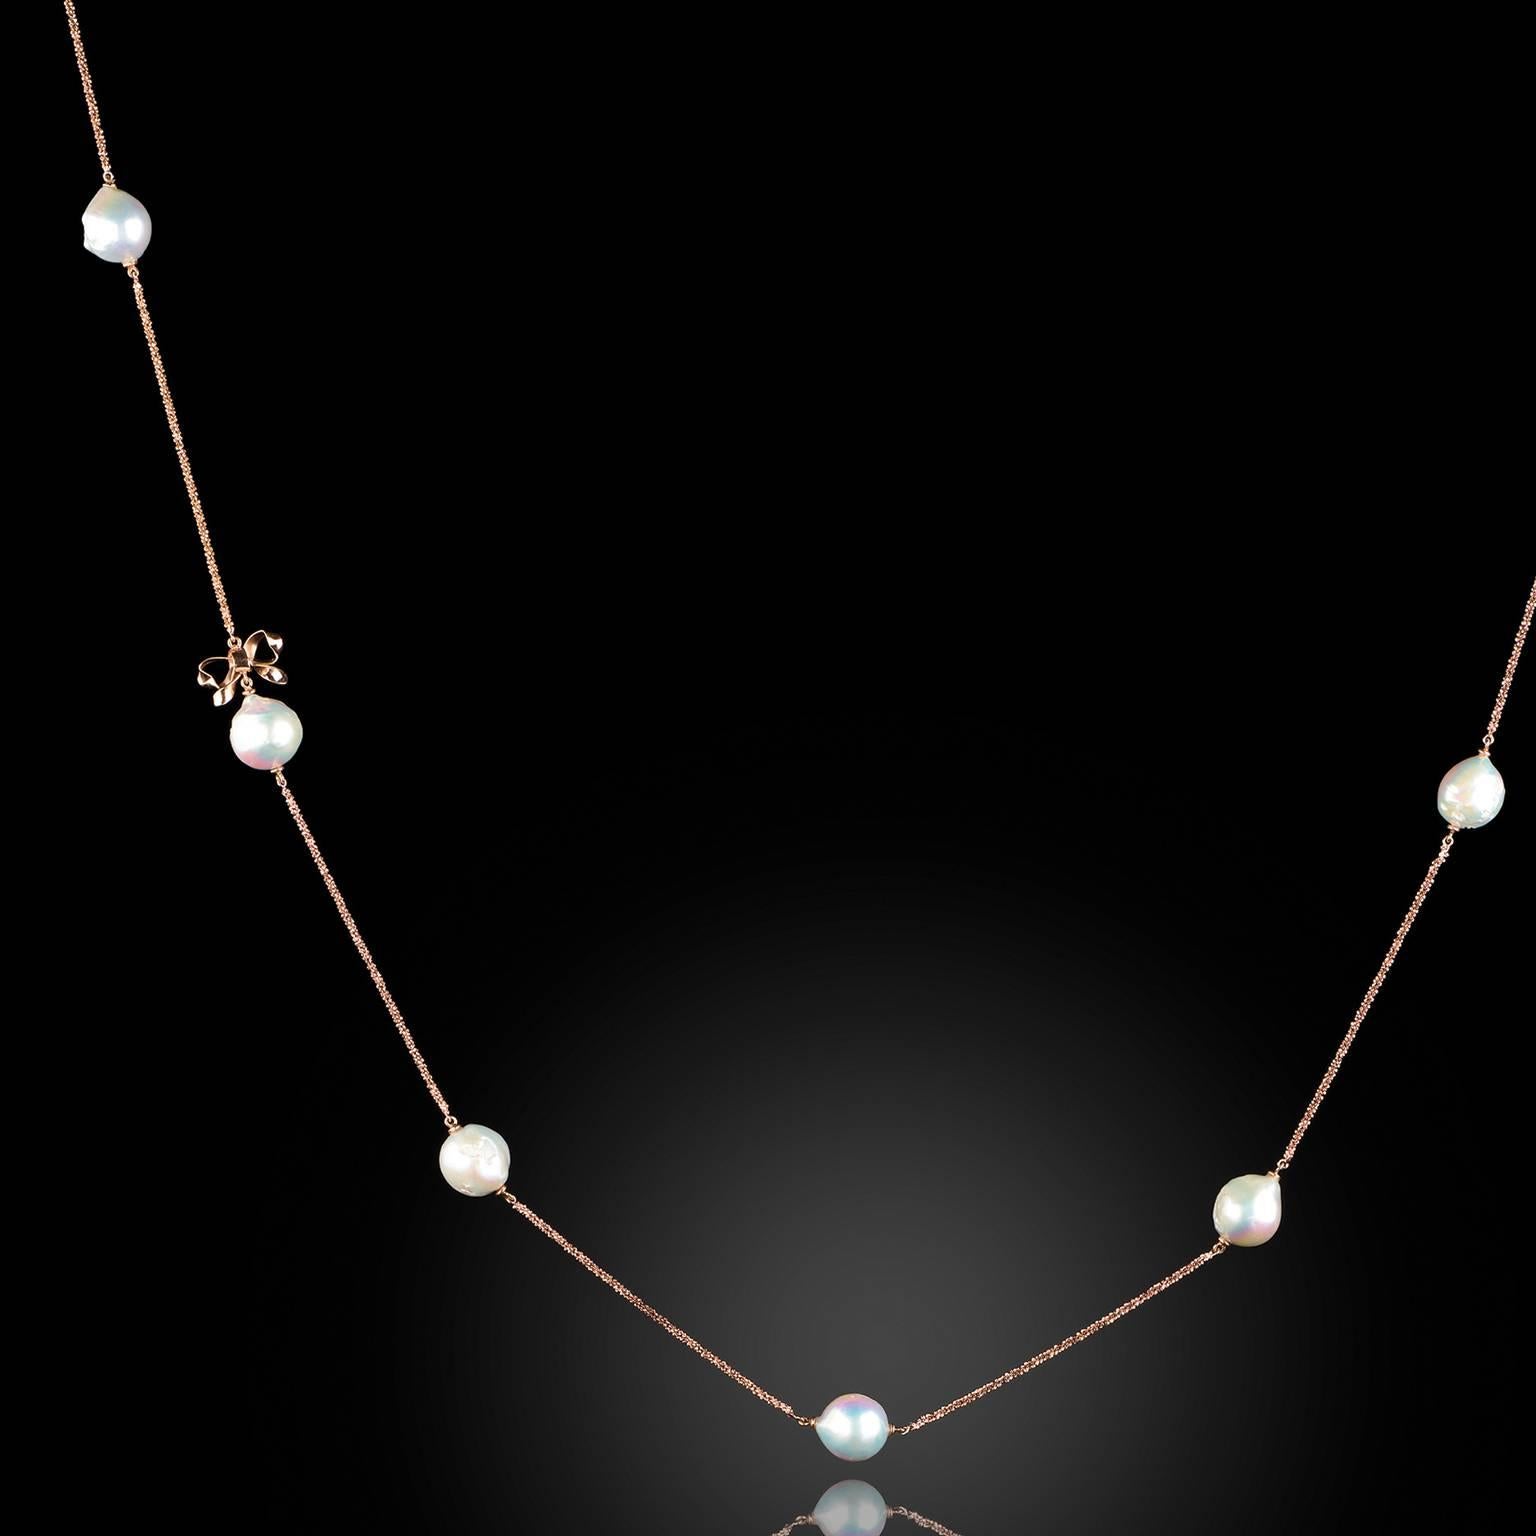 Building on the fundamental natural beauty of pearls, Géraldine has reimagined the traditional necklace. This vintage style work features nine lustrous baroque pearls in a perfectly balanced composition on a chain of rose gold vermeil. The 107